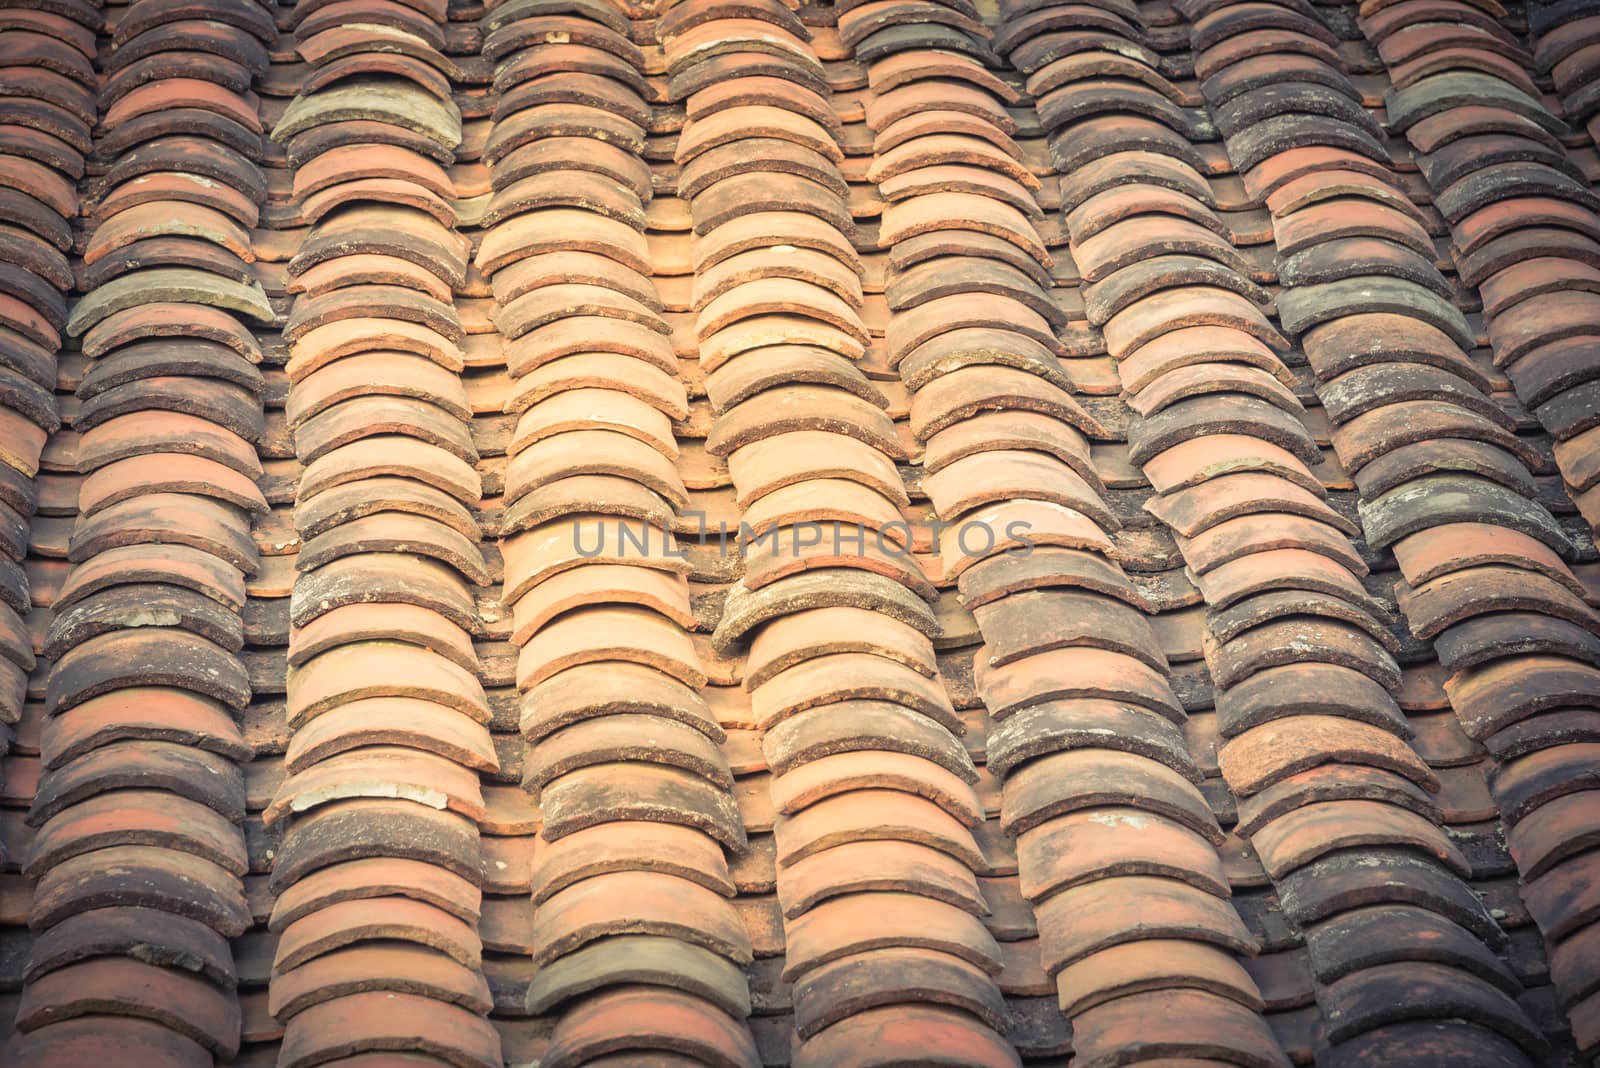 Vintage tone curved clay tiled roof in various colors from an old house in North Vietnam, late afternoon light. Ancient, weathered roofing surface, moss texture. Natural seamless pattern background